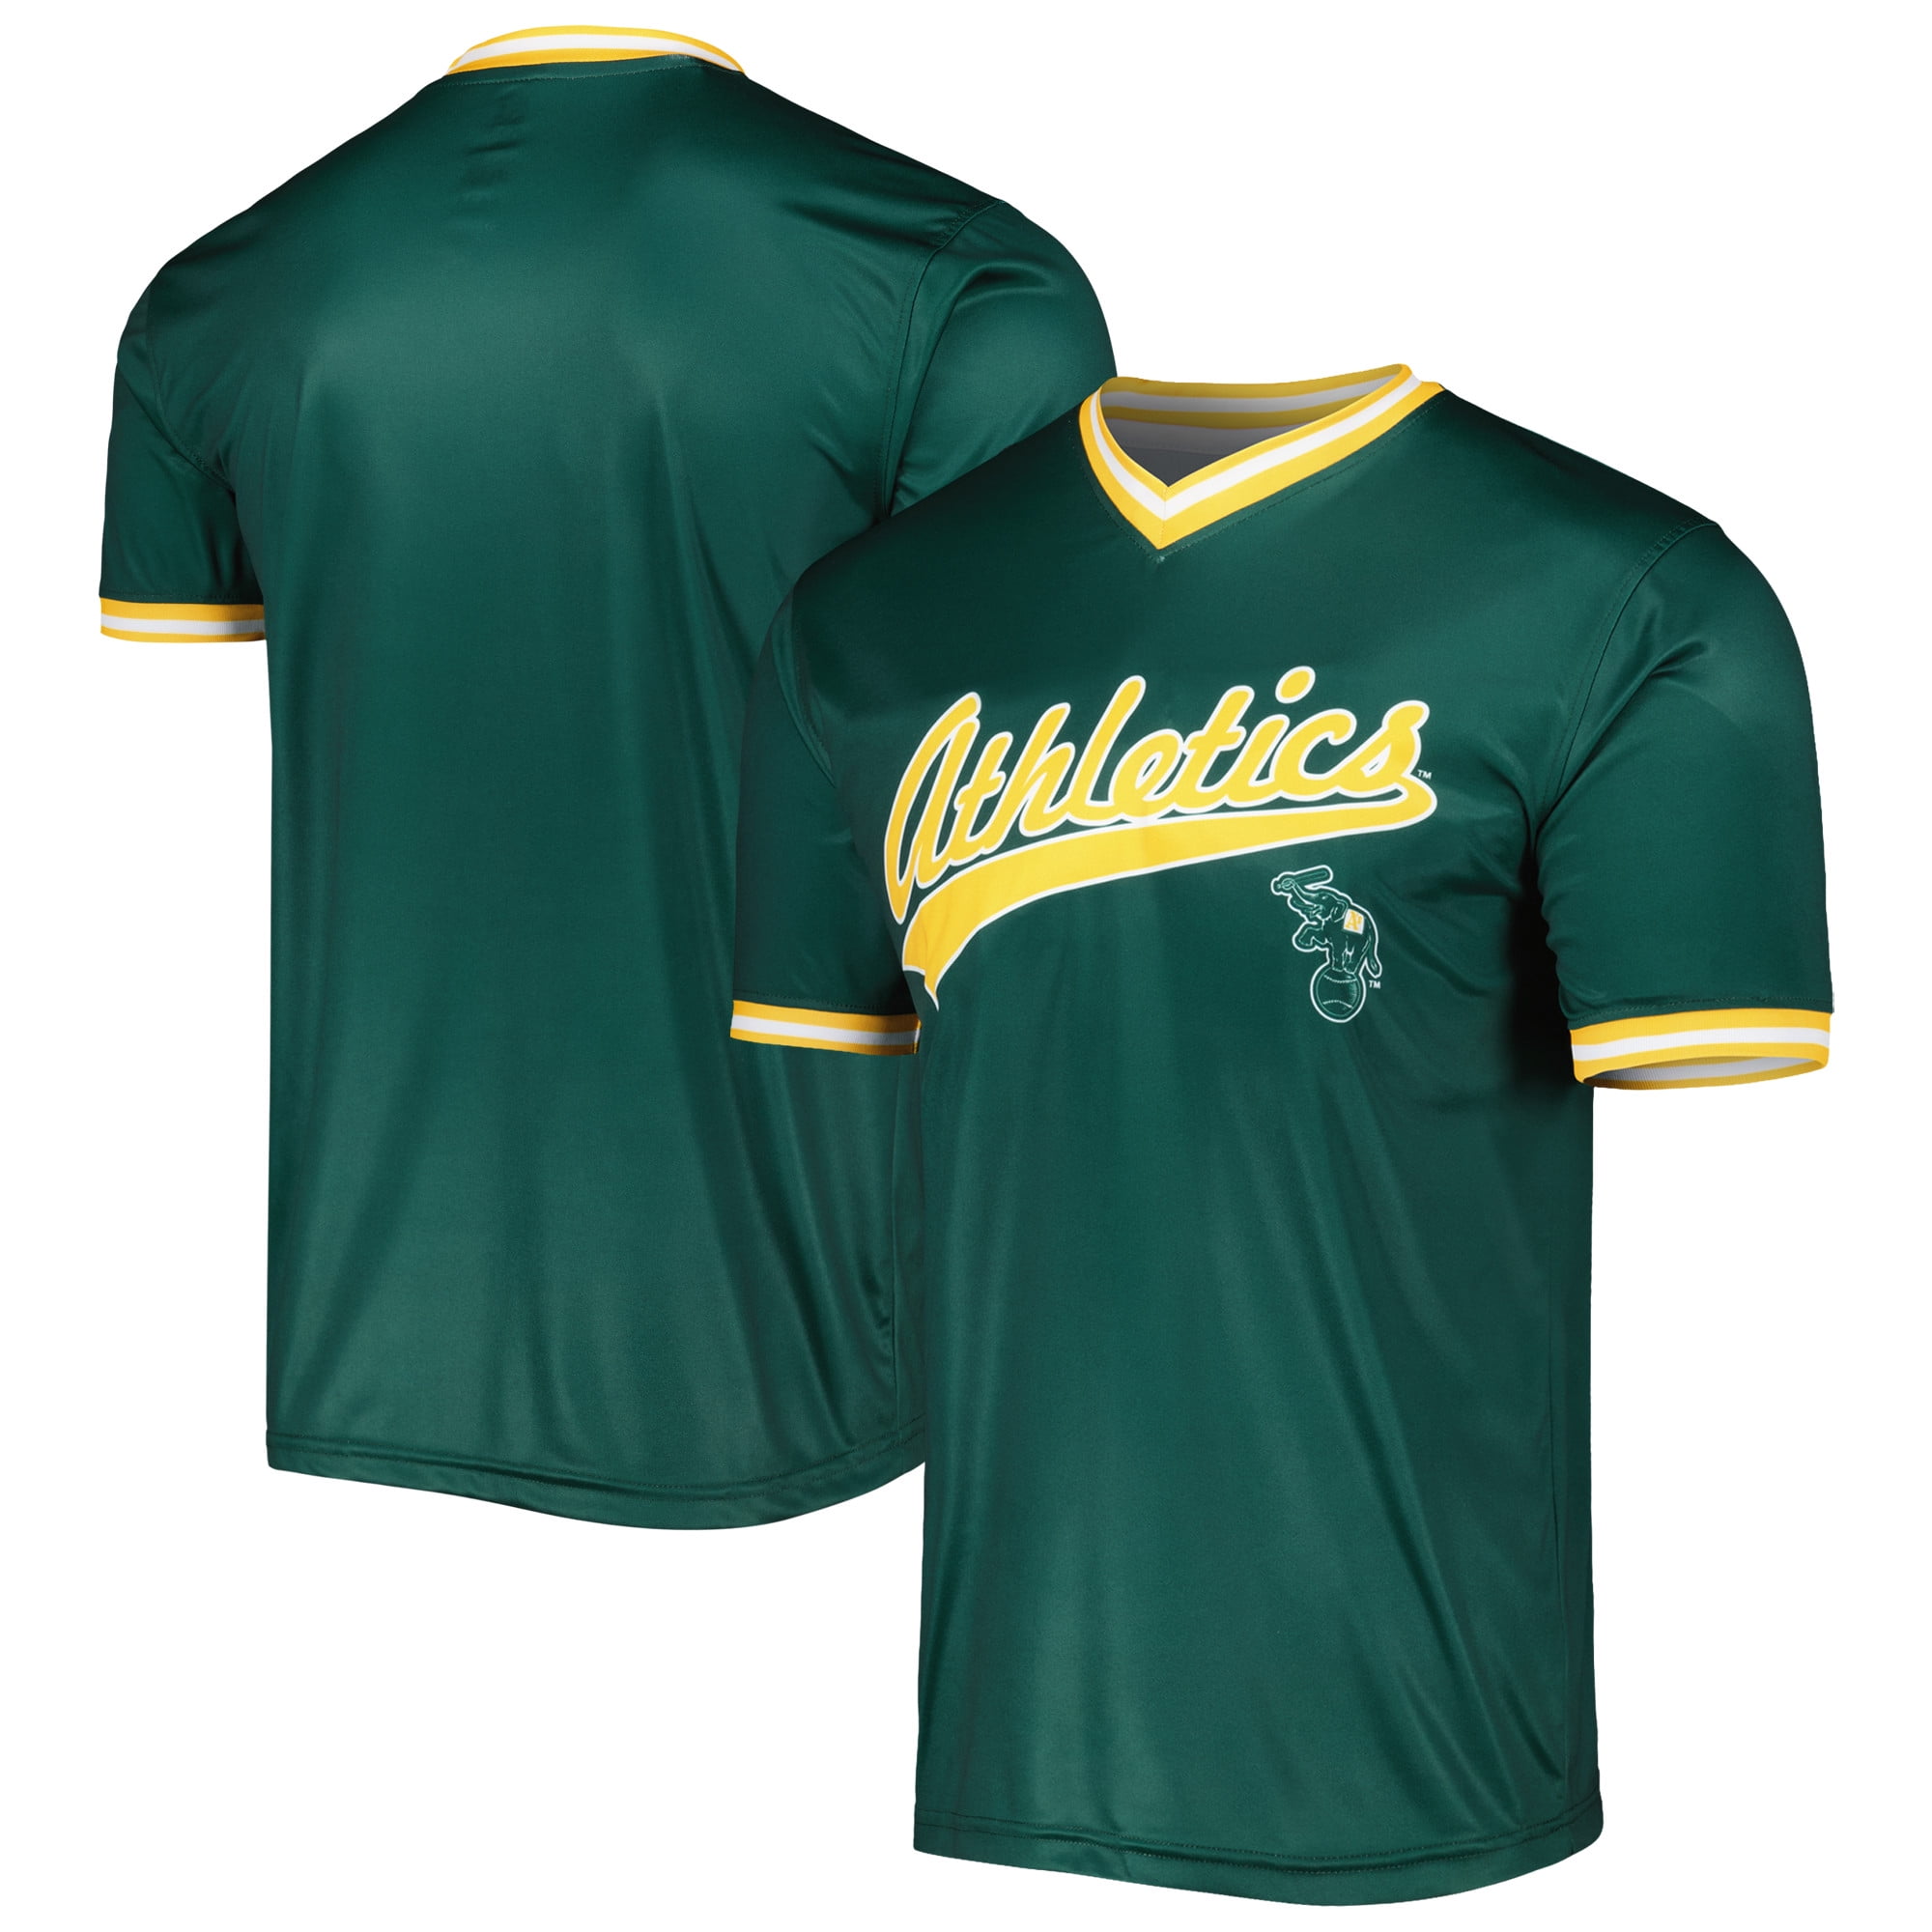 Oakland Athletics official jersey